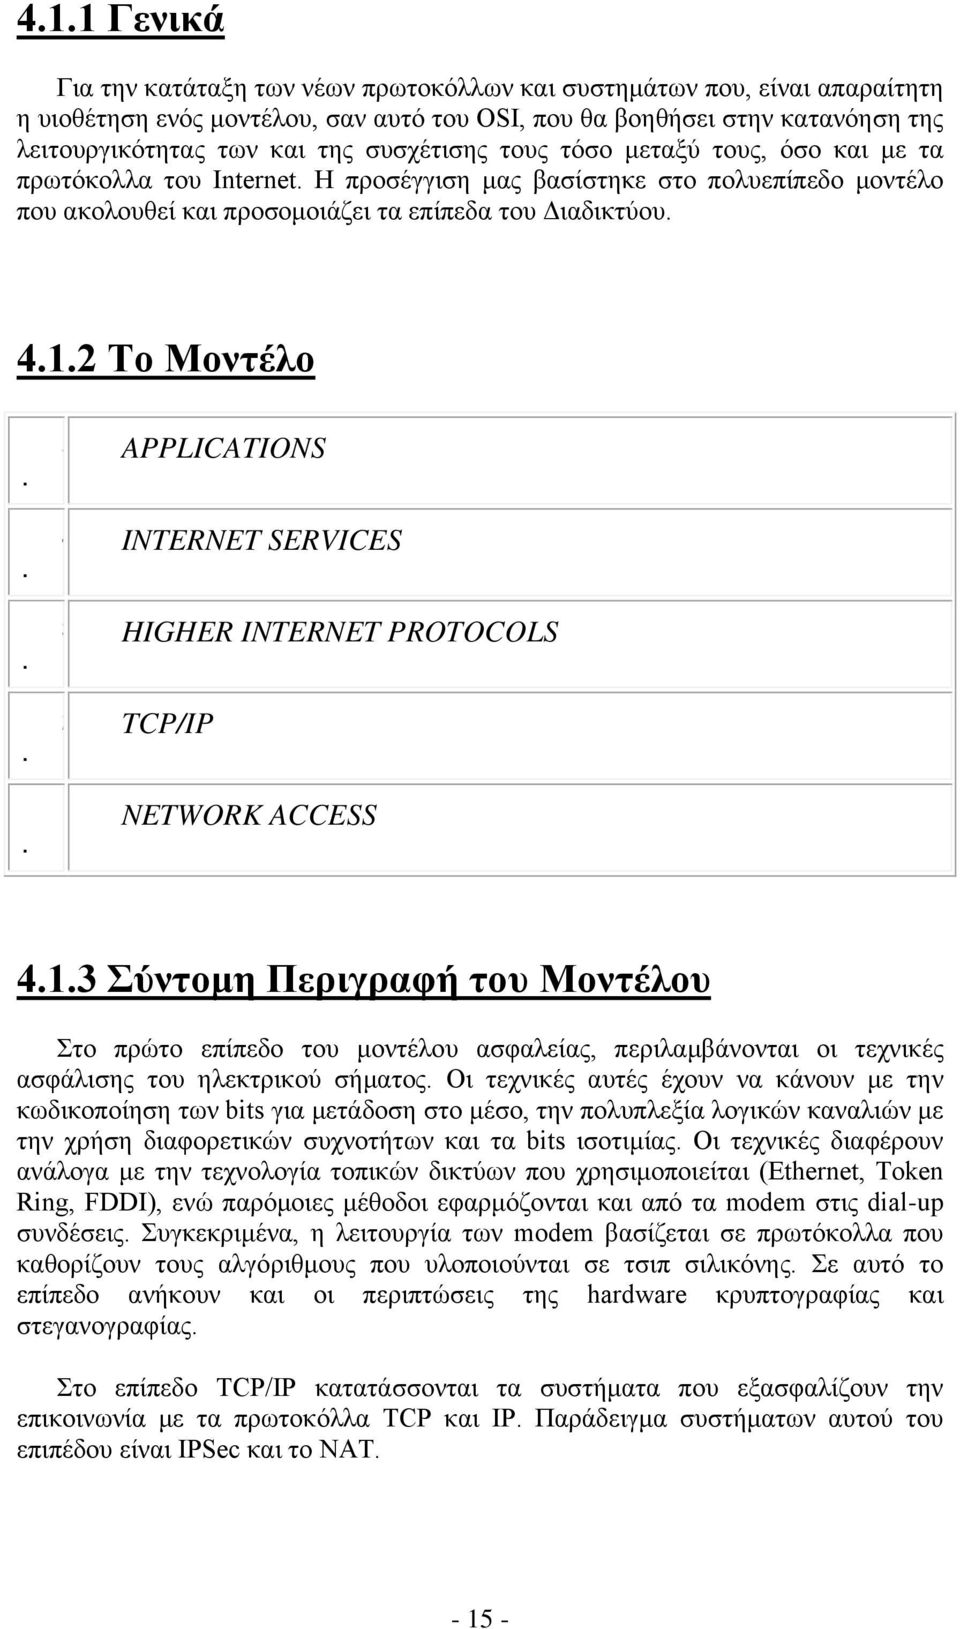 .... 5 4 3 2 APPLICATIONS INTERNET SERVICES HIGHER INTERNET PROTOCOLS TCP/IP NETWORK ACCESS 4.1.